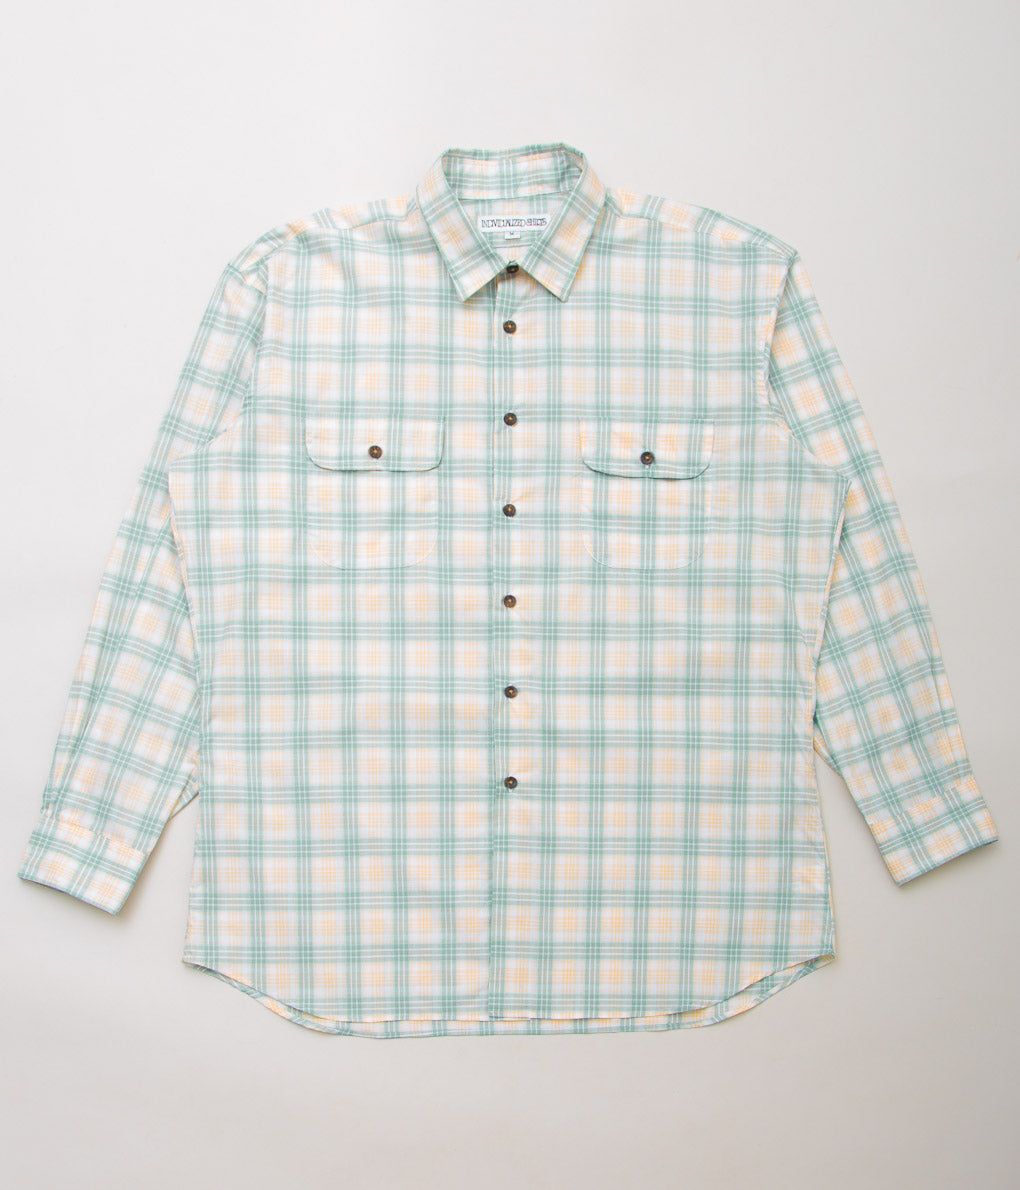 INDIVIDUALIZED SHIRTS×THE STORE BY MAIDENS 'SLOB WORKERS SHIRTS'(GREEN CHECK)